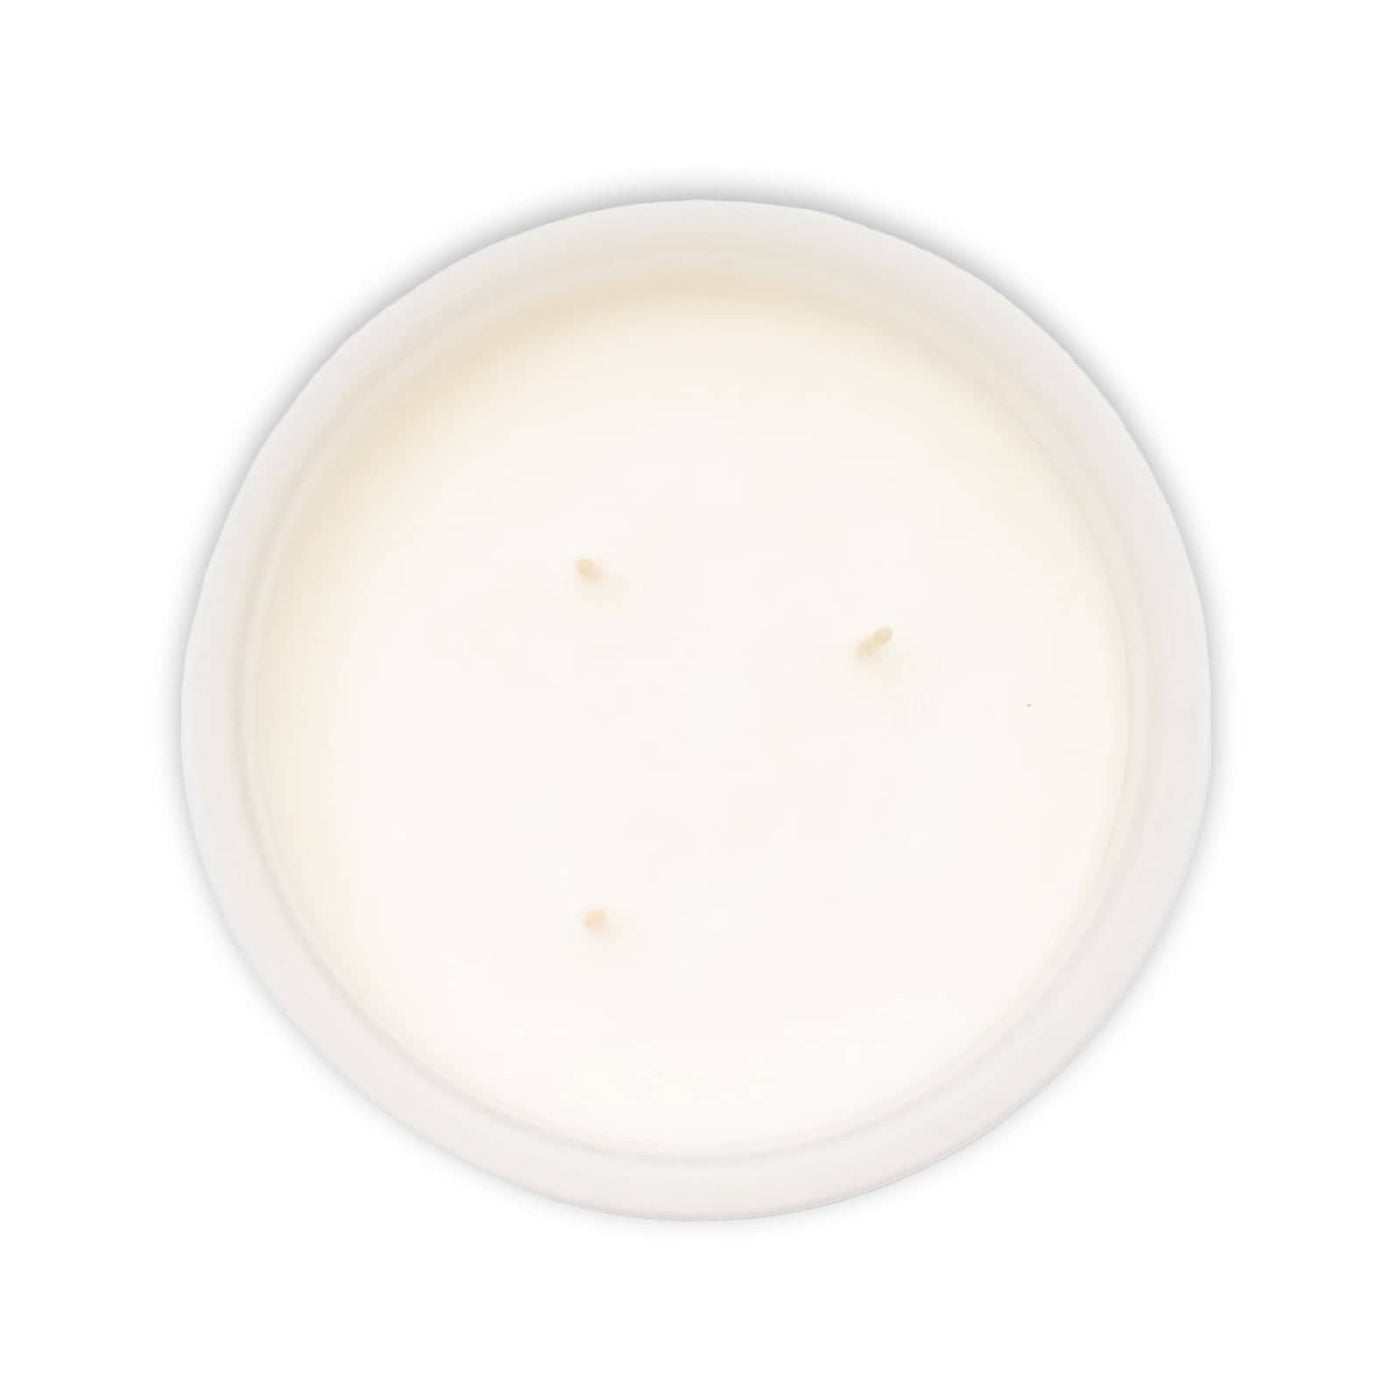 Calm 3-Wick Soy Wax Candle, White, 300 ml Candles sazy.com